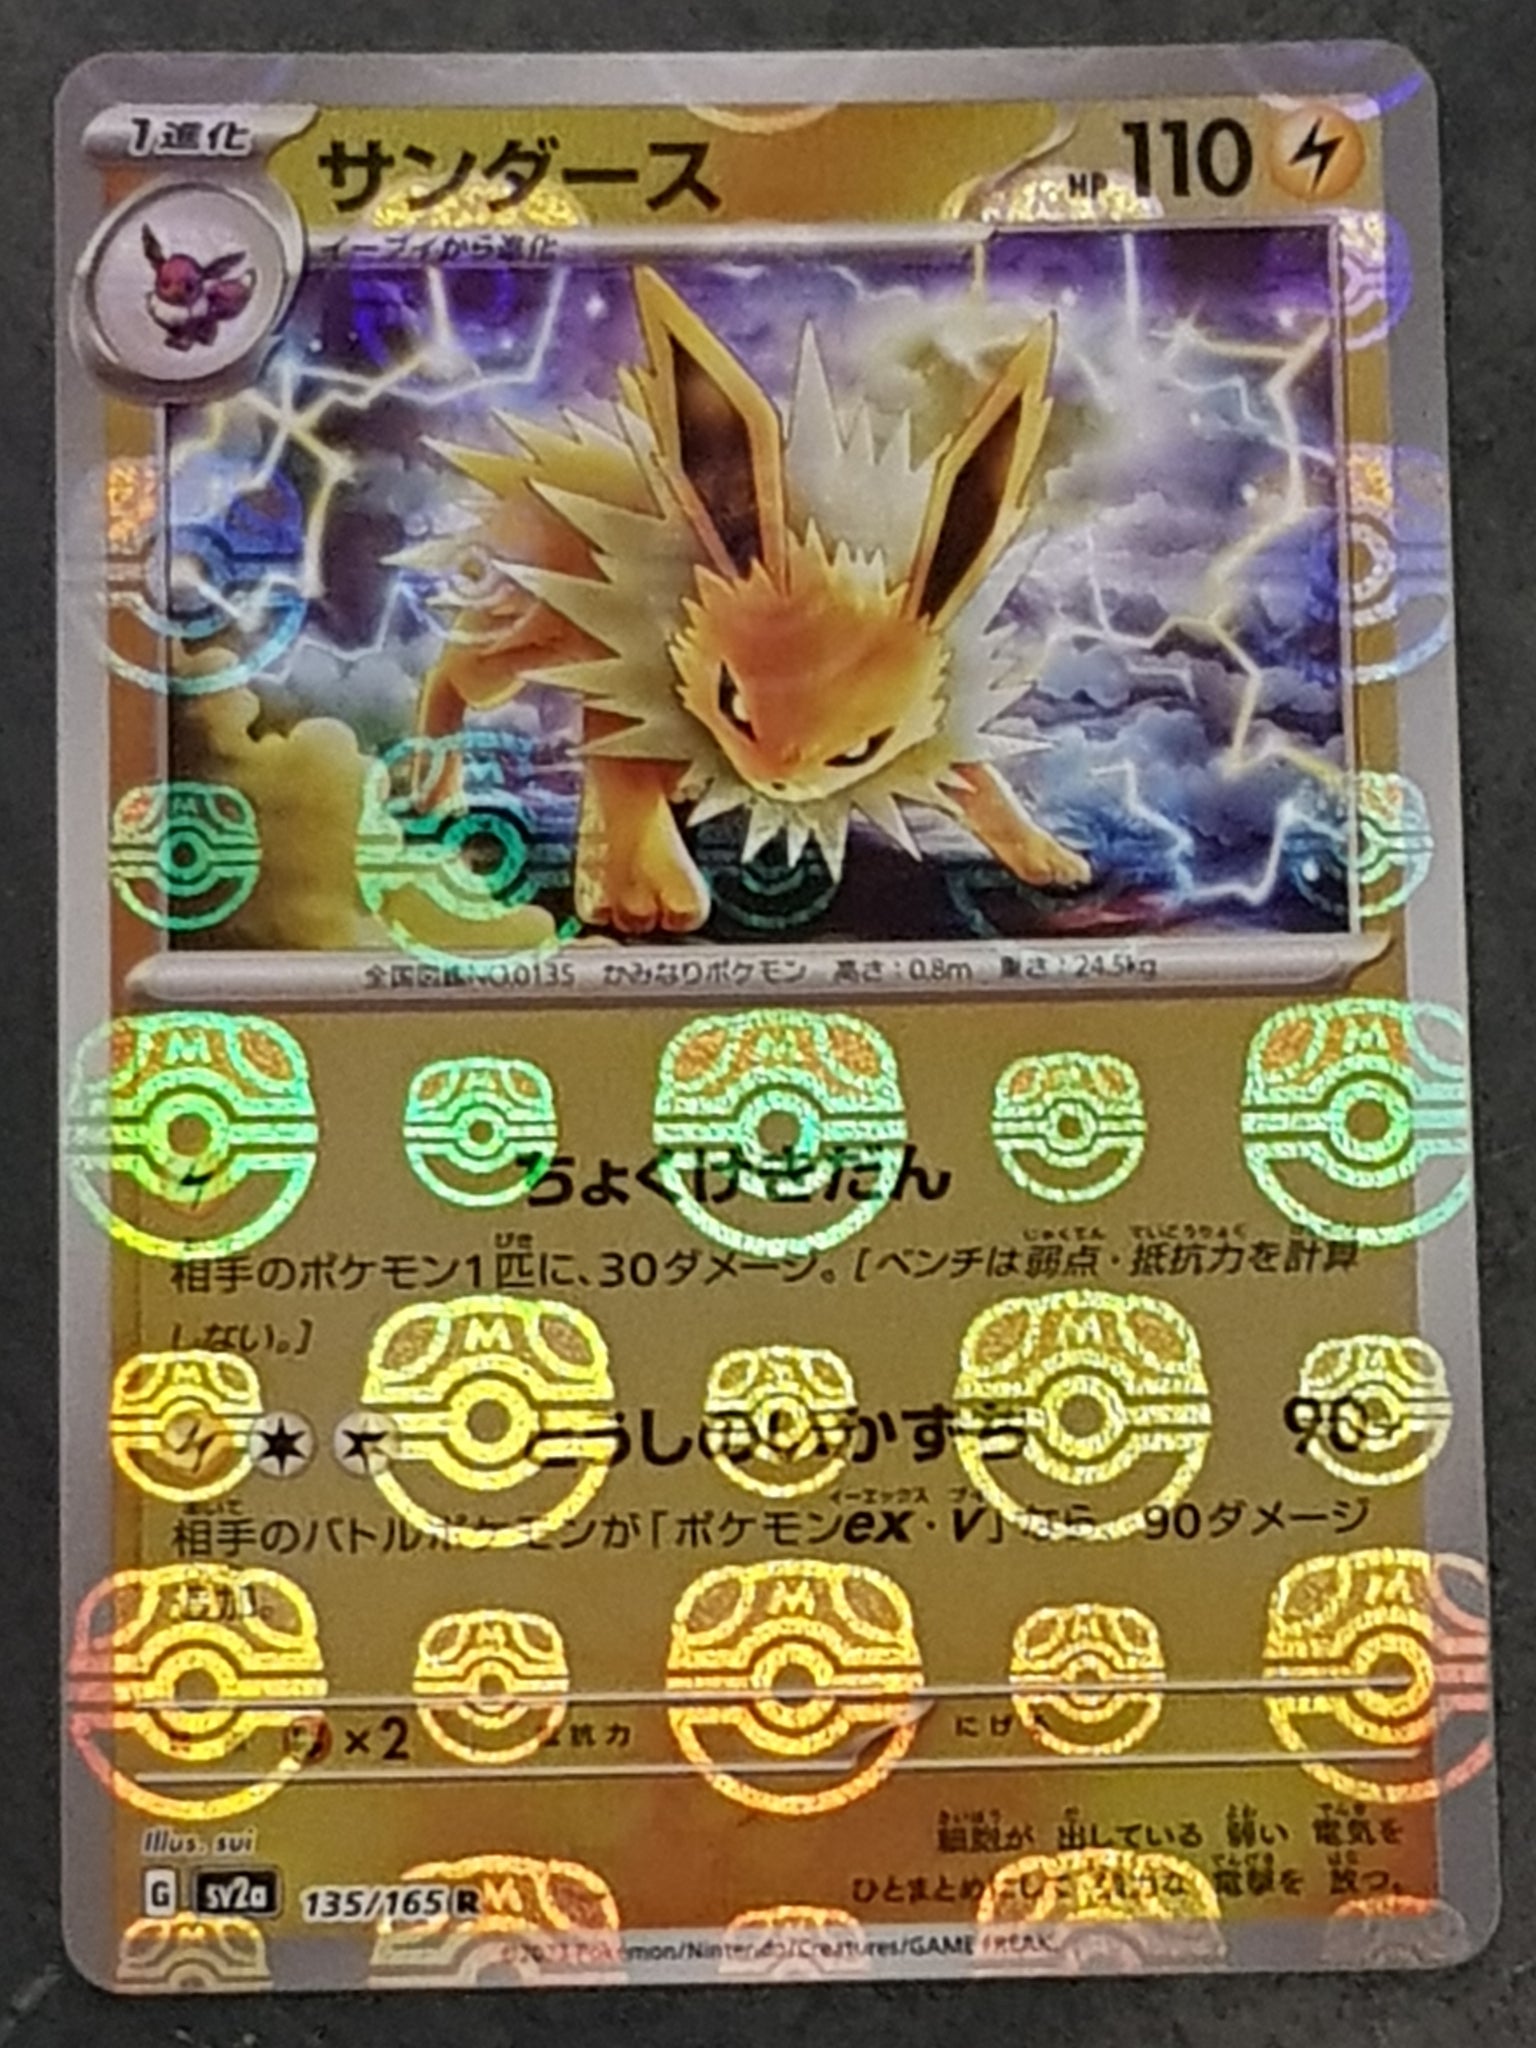 Eevee and Jolteon from Pokemon Card 151! 